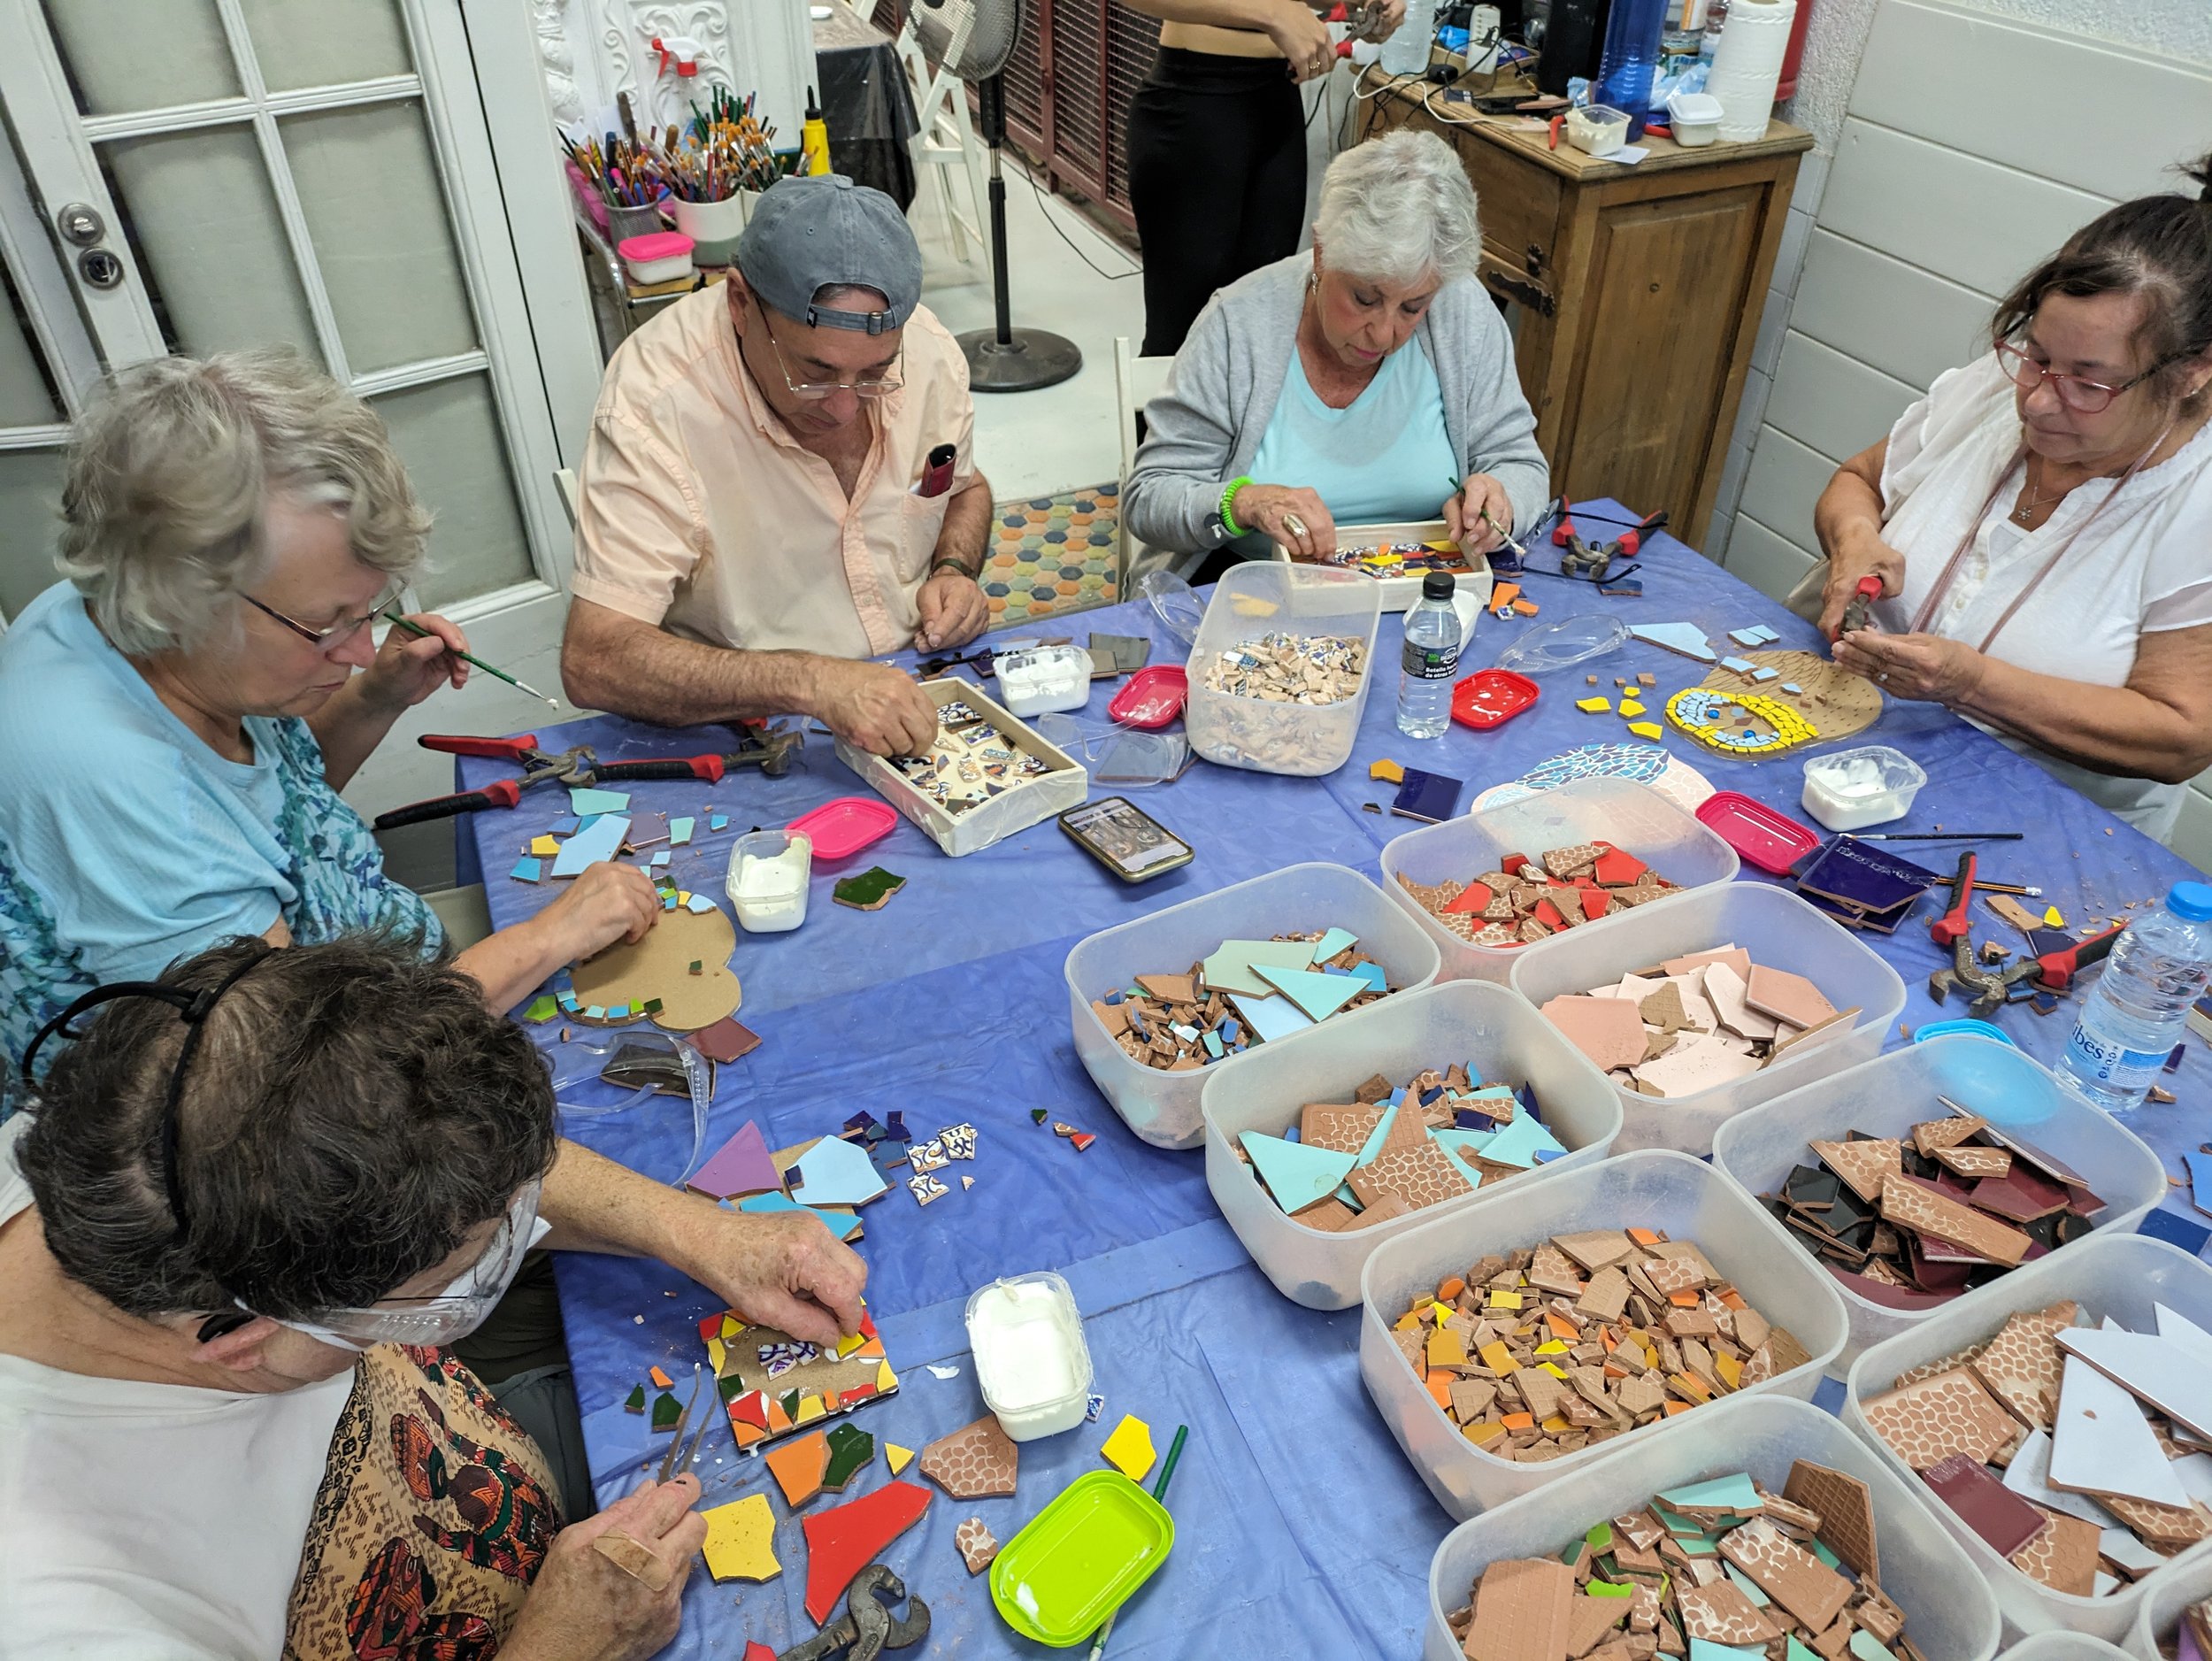 Mosaic Workshop for creative people